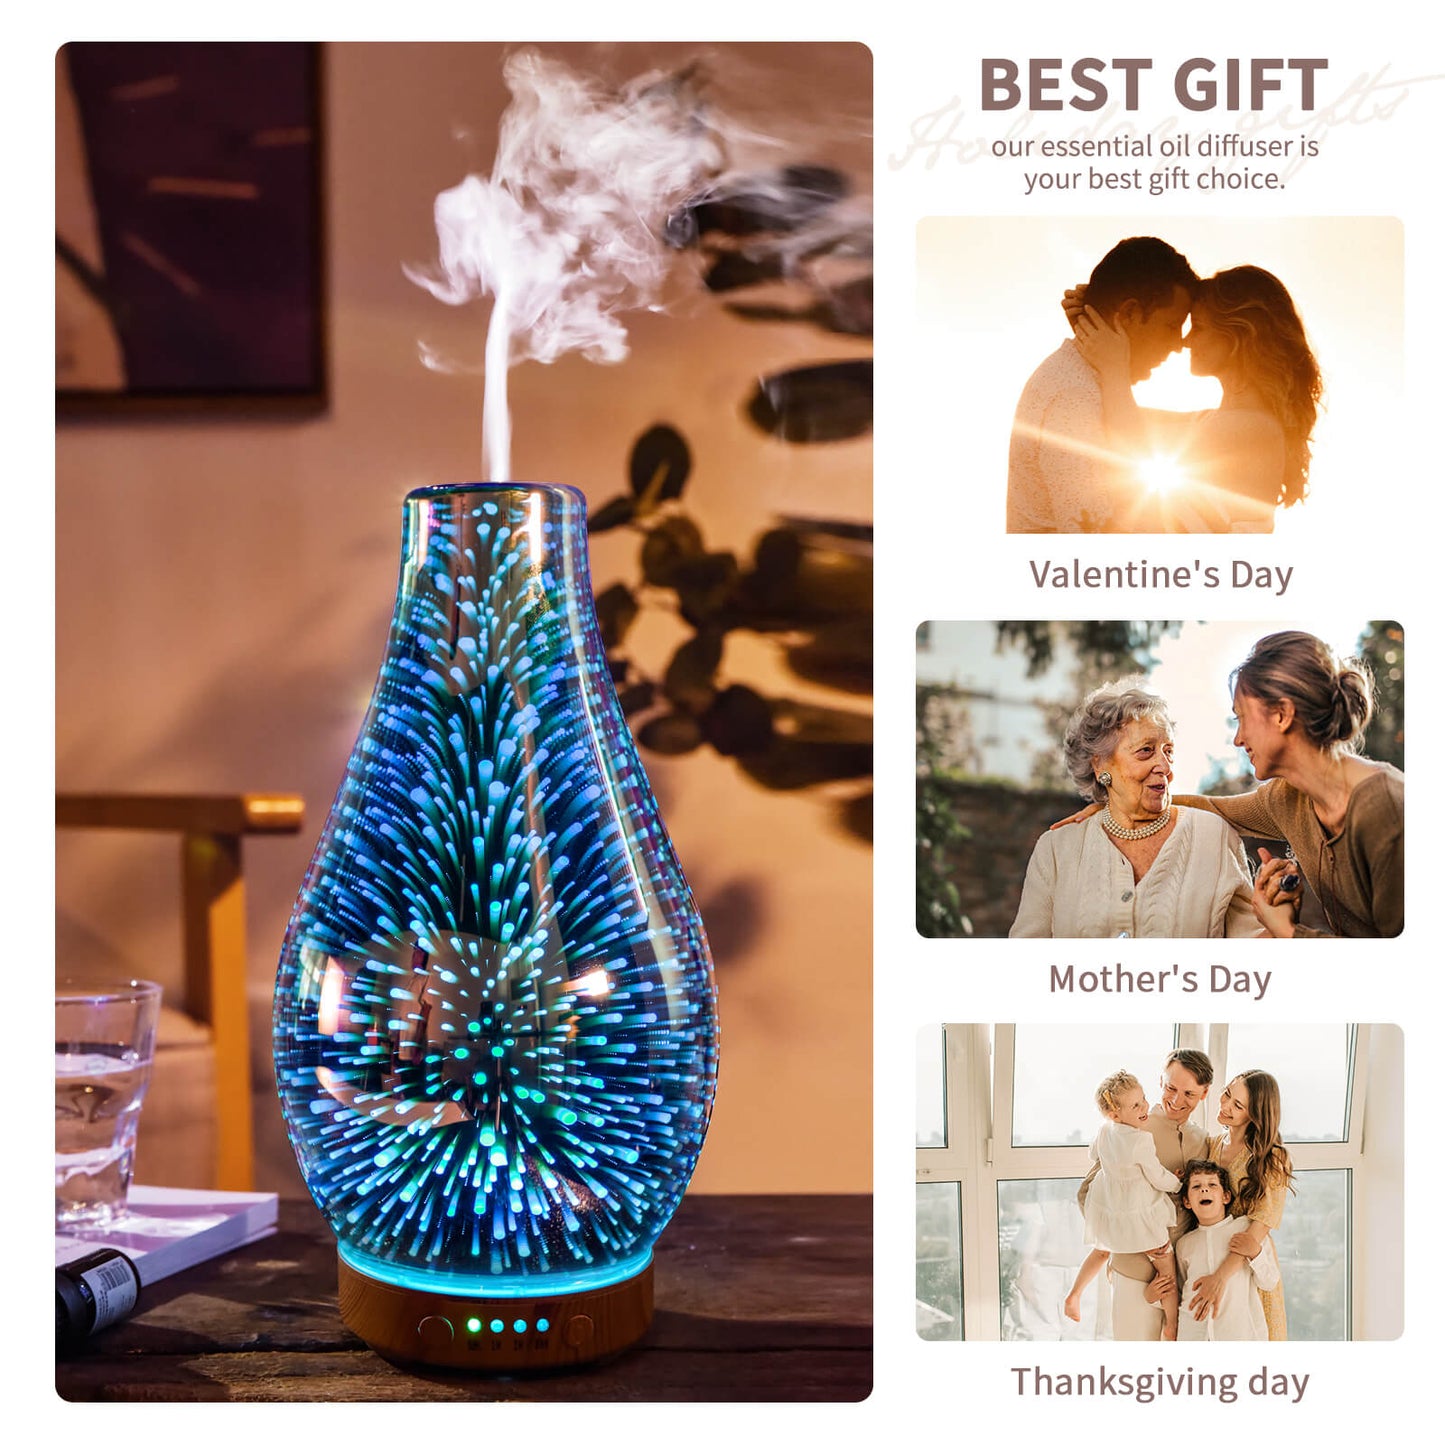 Essential Oil Diffuser 3D Glass Aromatherapy Ultrasonic Humidifier Cool Mist, Auto Shut-Off,Timer Setting, BPA Free for Home Office Hotel Yoga Gym Leisure SPA Gift 100ml